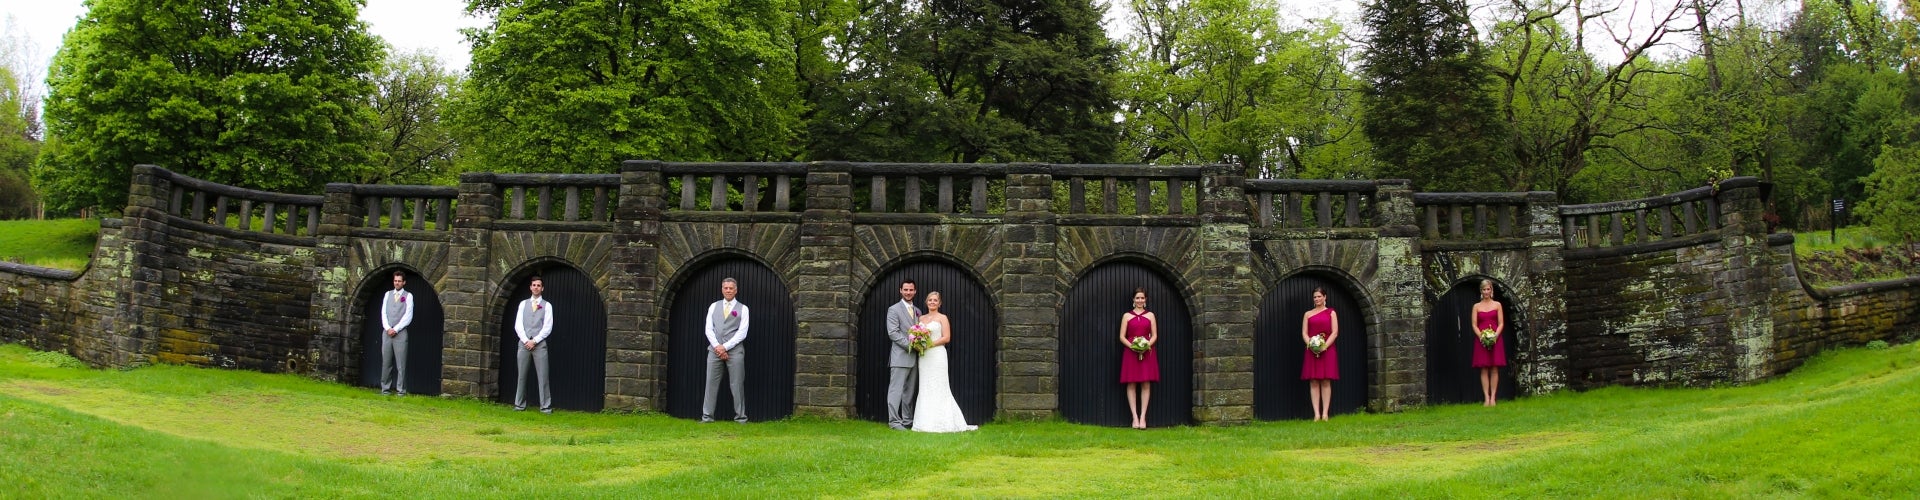 A wedding party stands in front a stone wall, each in their own archway.